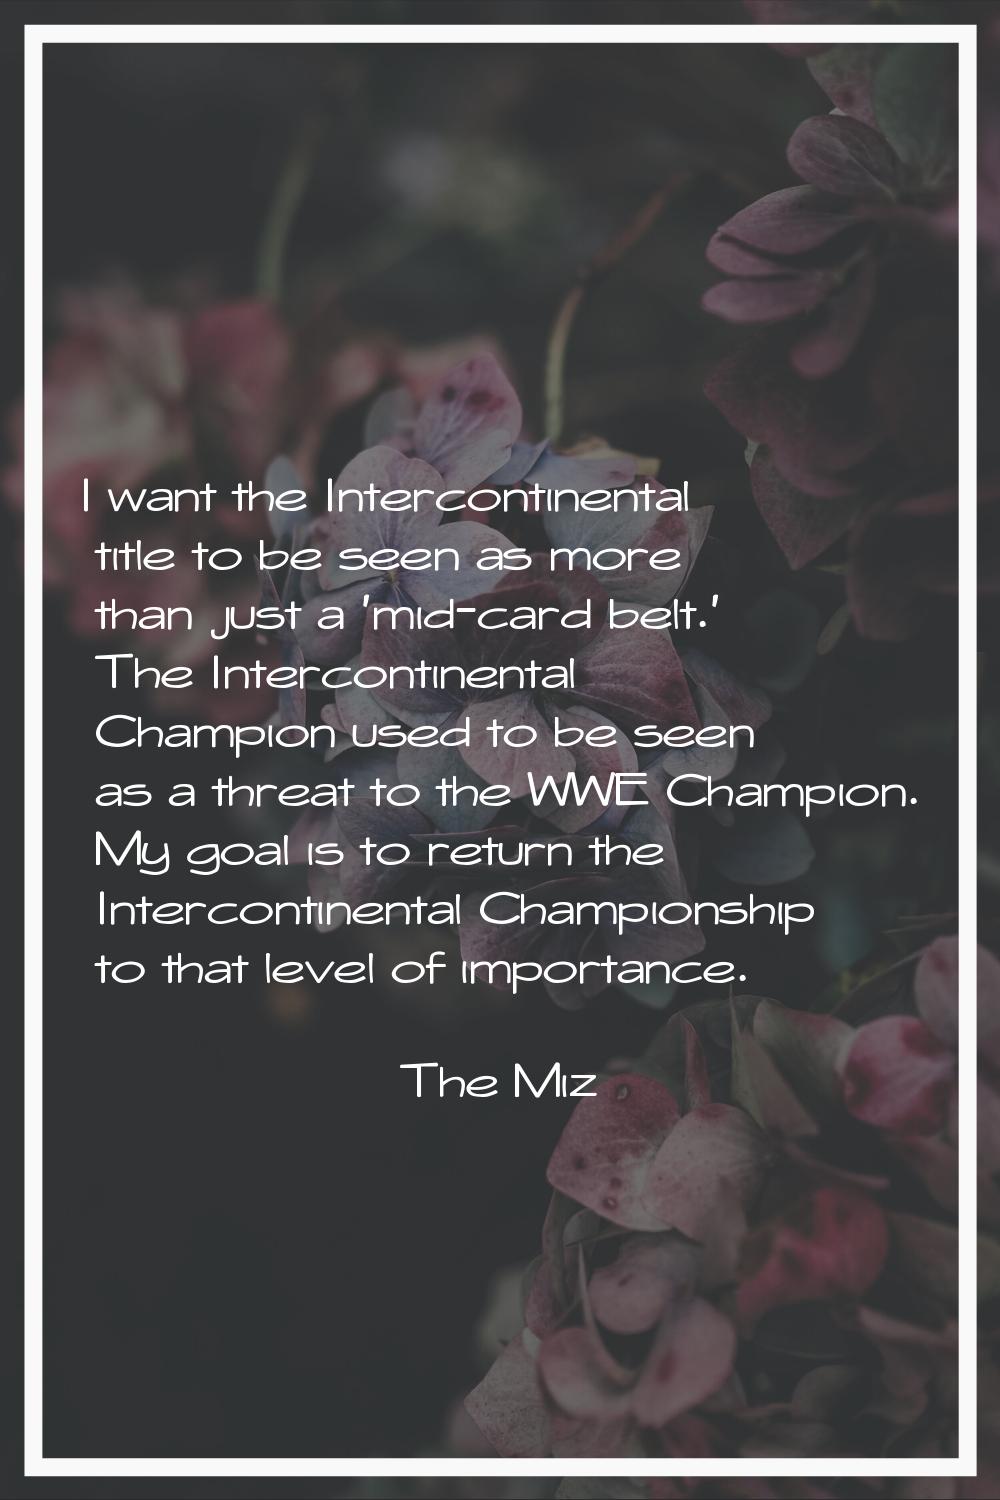 I want the Intercontinental title to be seen as more than just a 'mid-card belt.' The Intercontinen